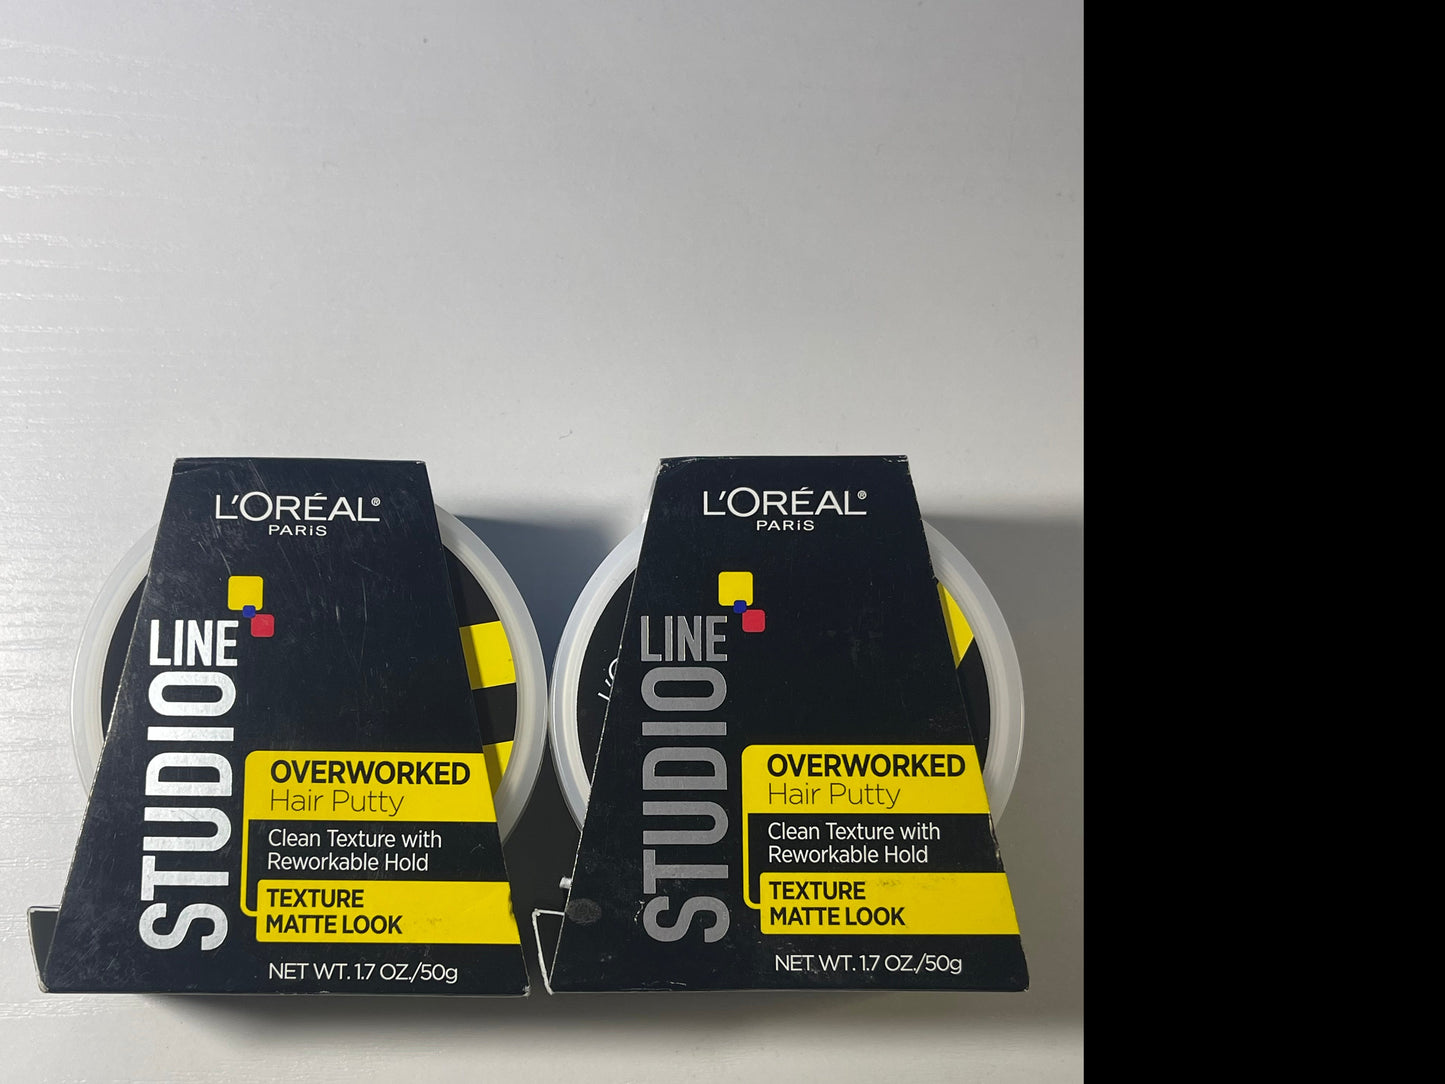 L'Oreal Studio Line Overworked Hair Putty Clean Texture Matte Look 1.7oz, 2 Pack